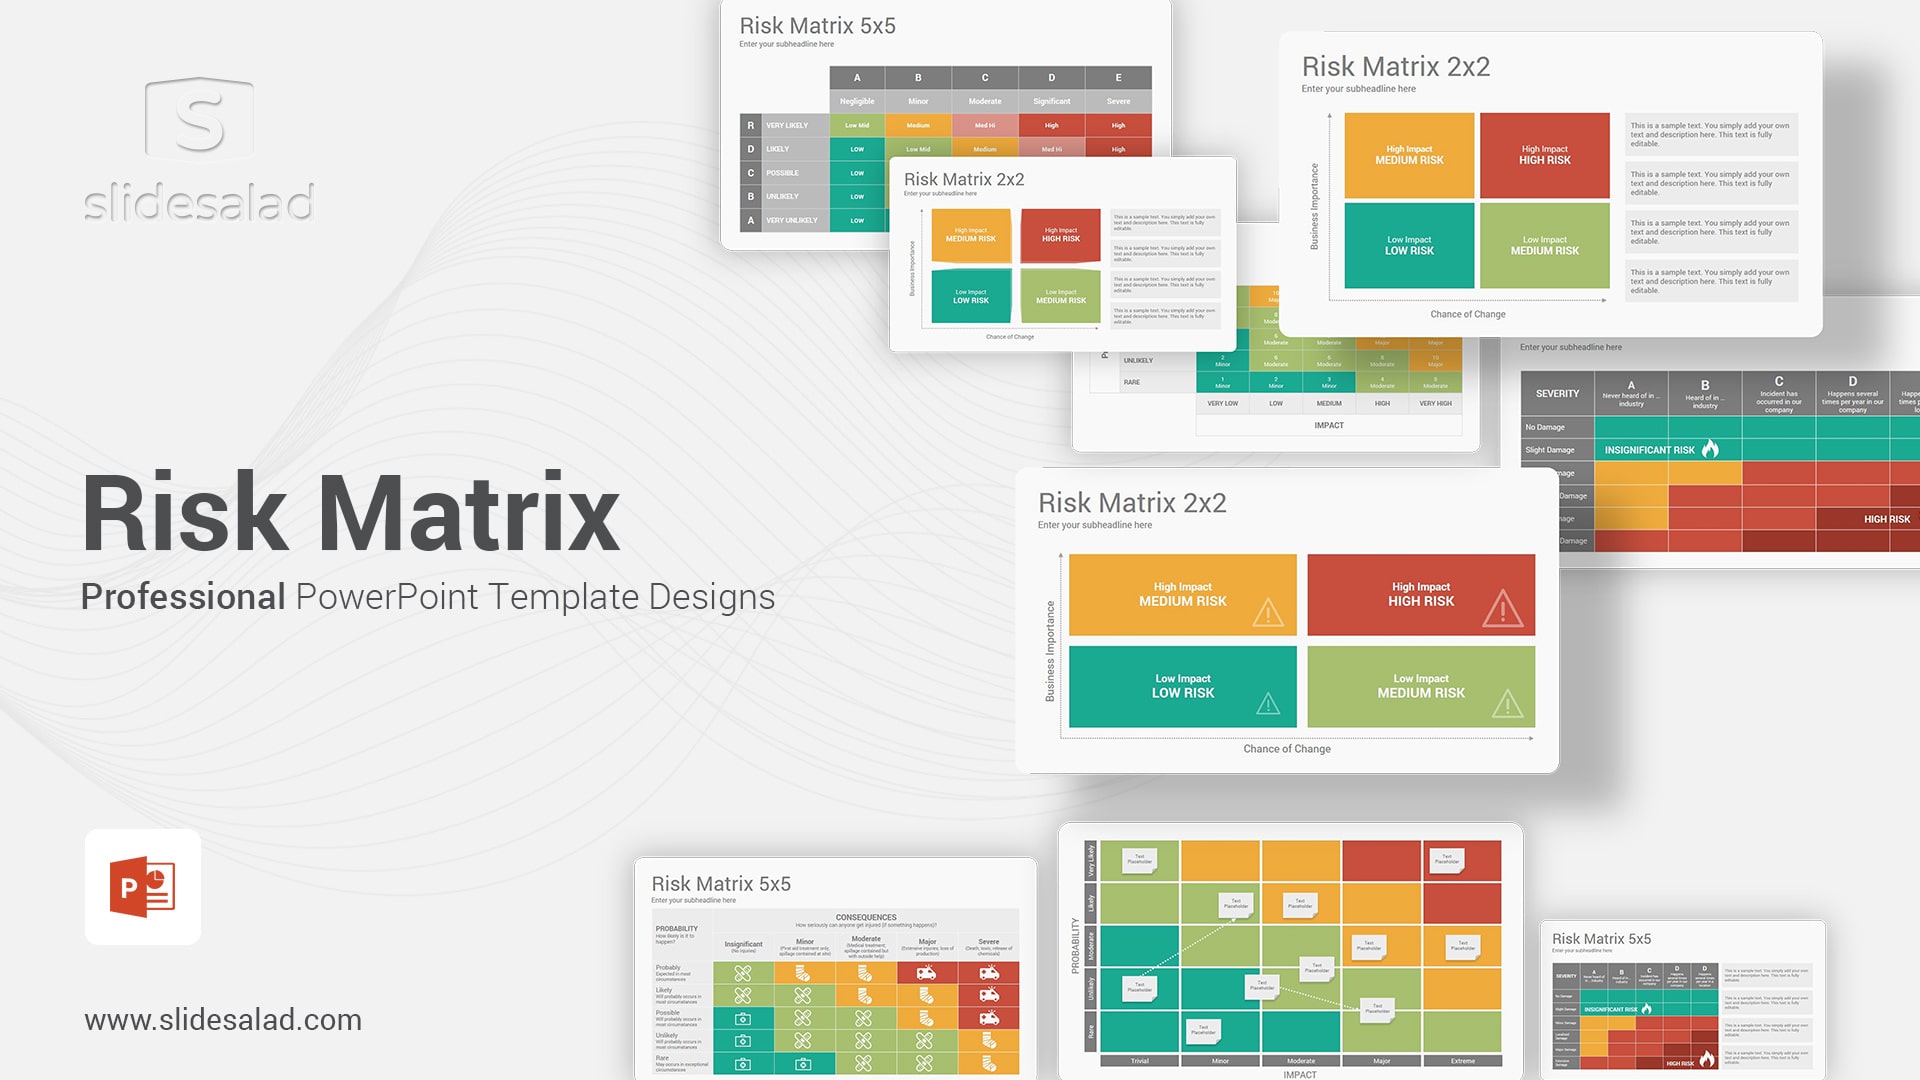 Risk Matrix Diagrams PowerPoint Template Designs - Download the PPT Template About the Best Project Management Tool Used for Risk Evaluation